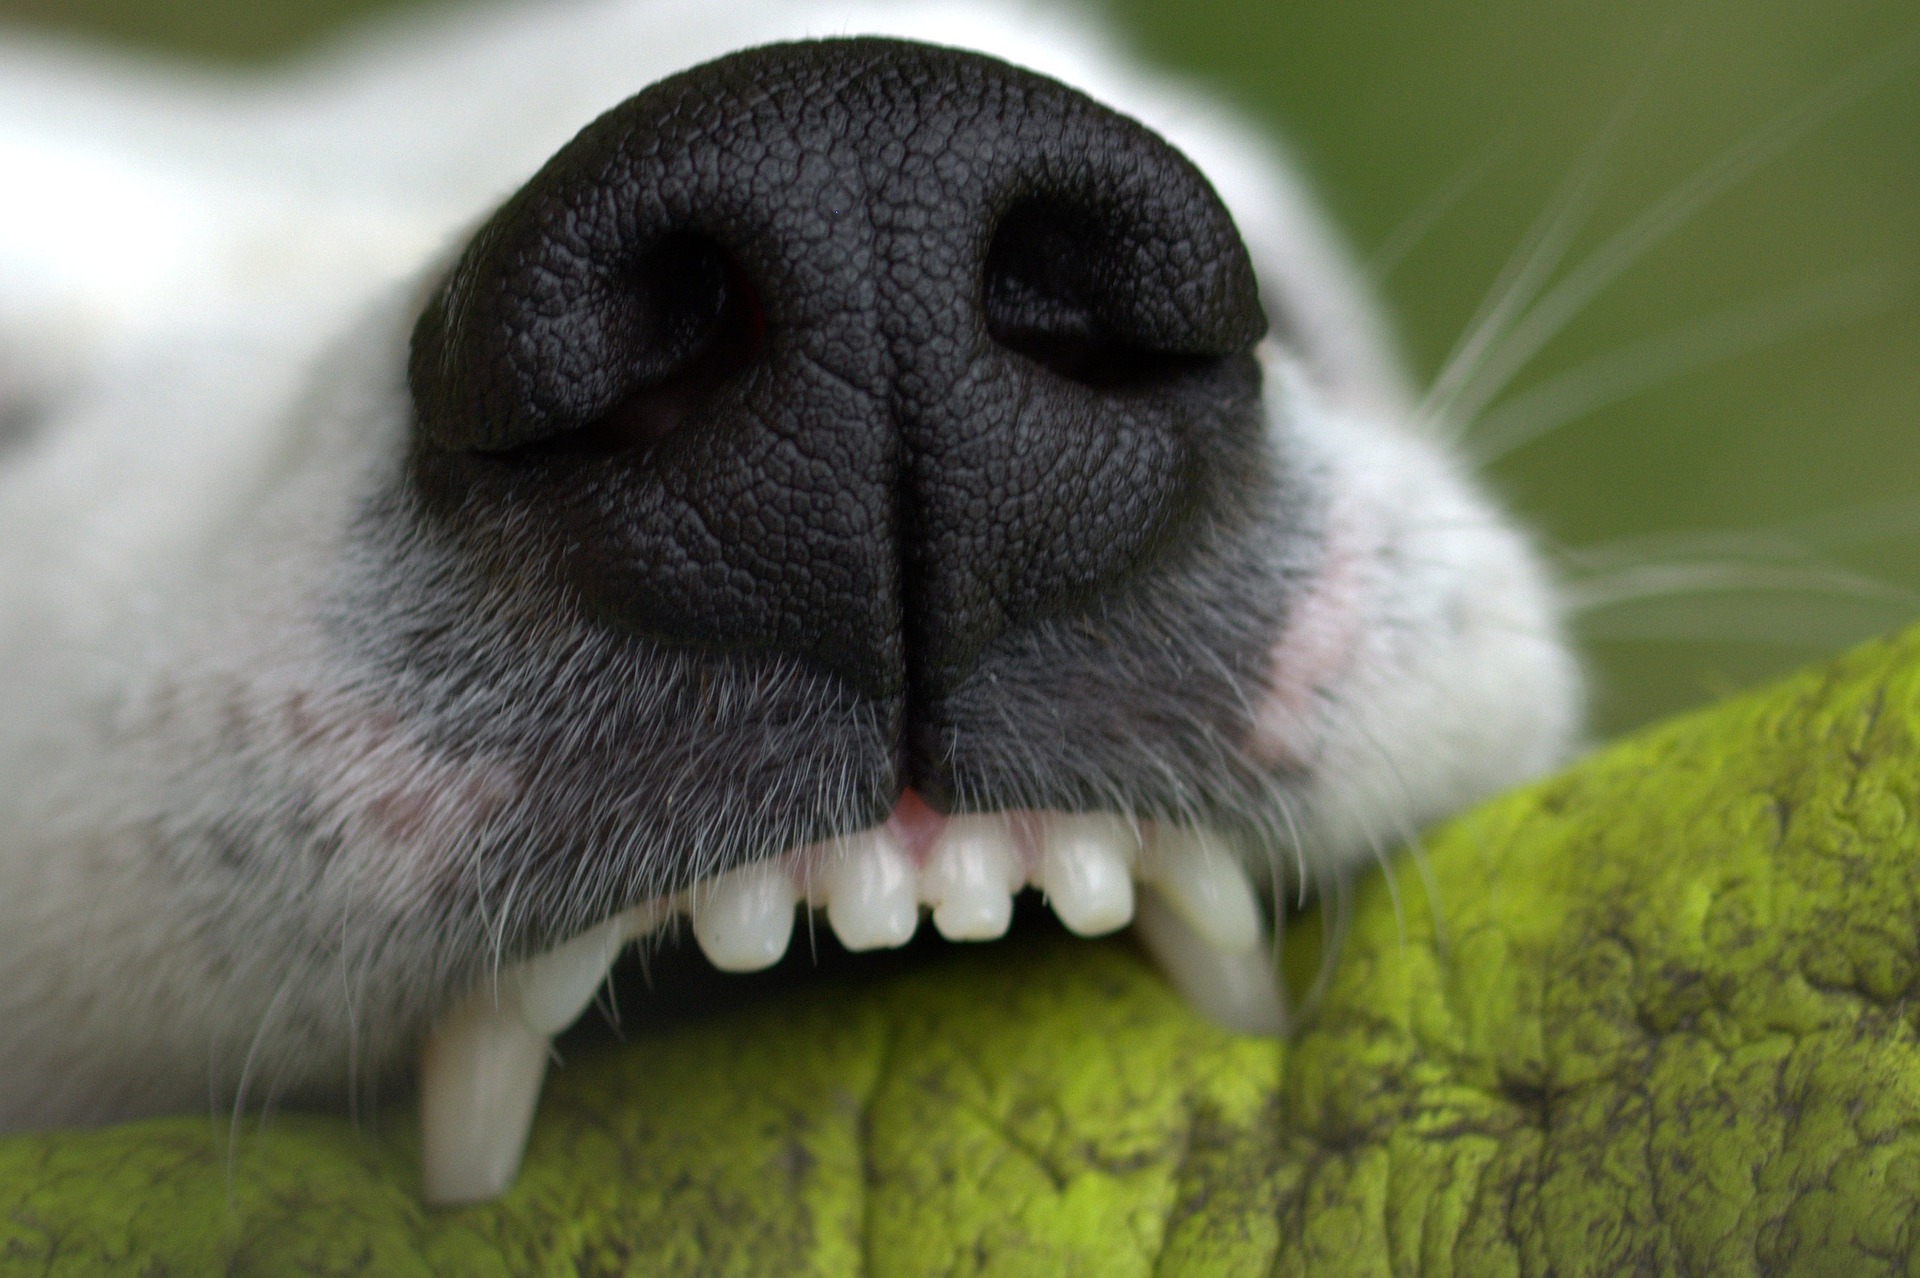 Close-up of dog biting a chew toy.